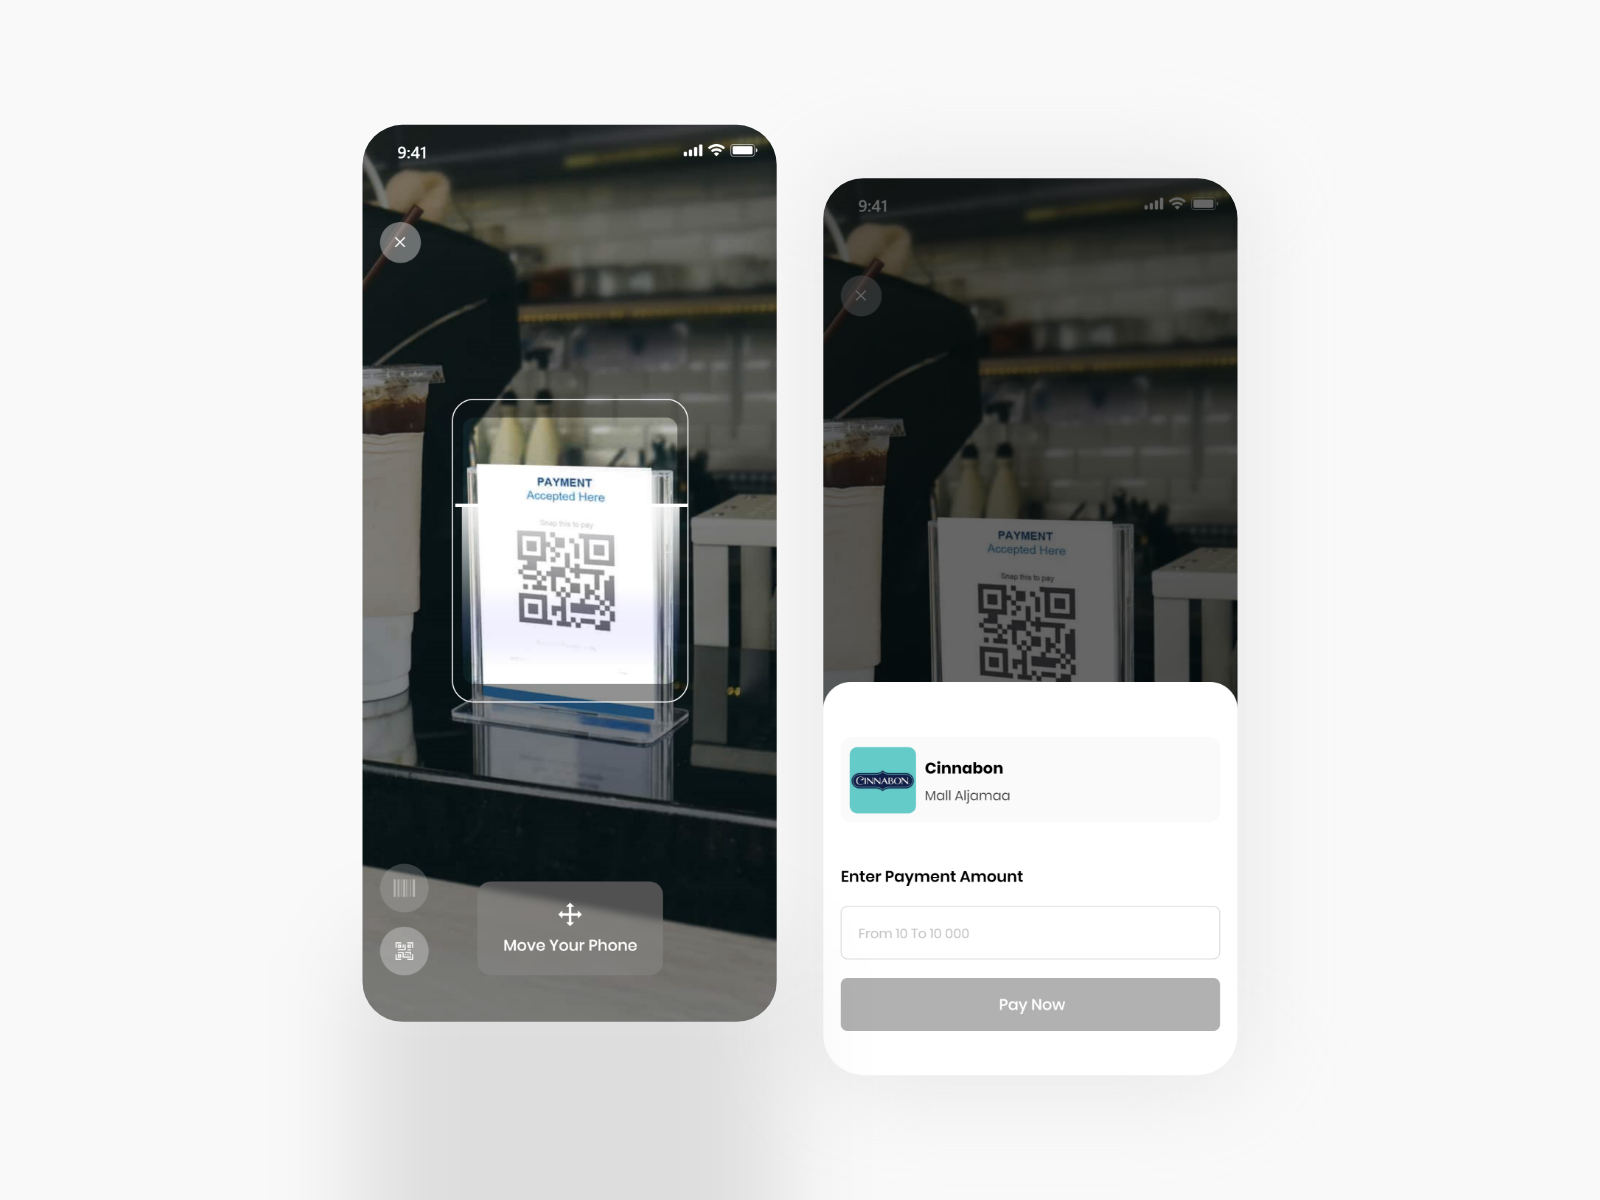 Trapay App - Scanning Screens by Israa Adel on Dribbble